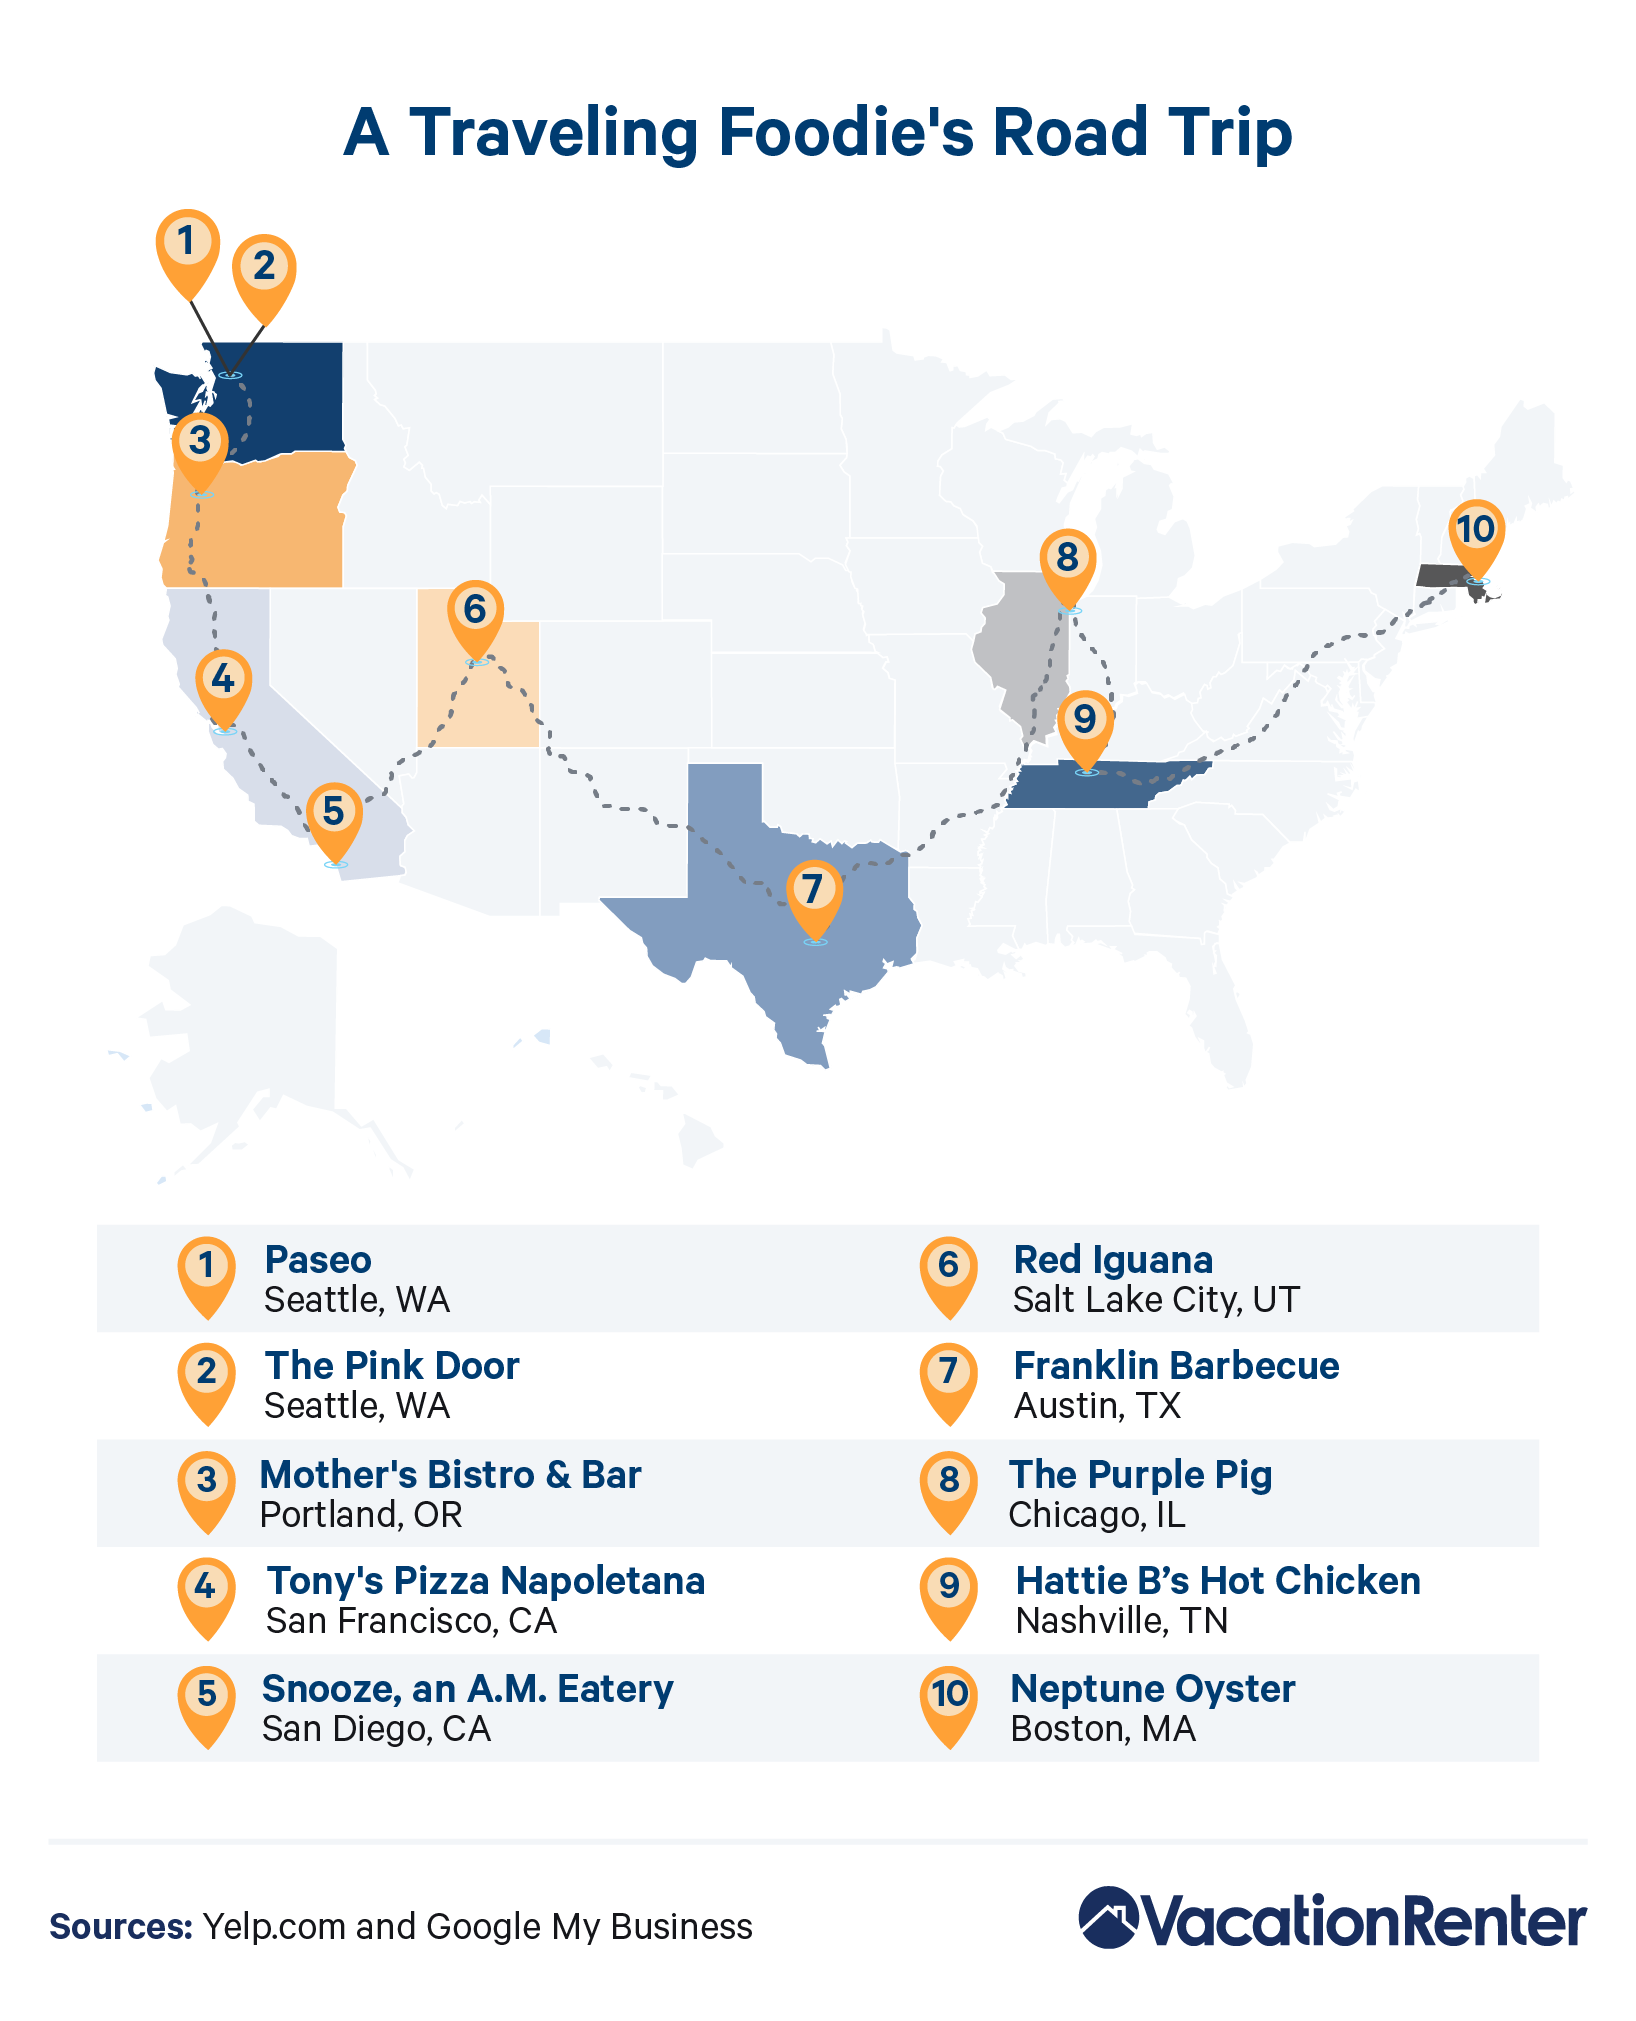 A road map of the top 10 restaurants according to traveling foodies